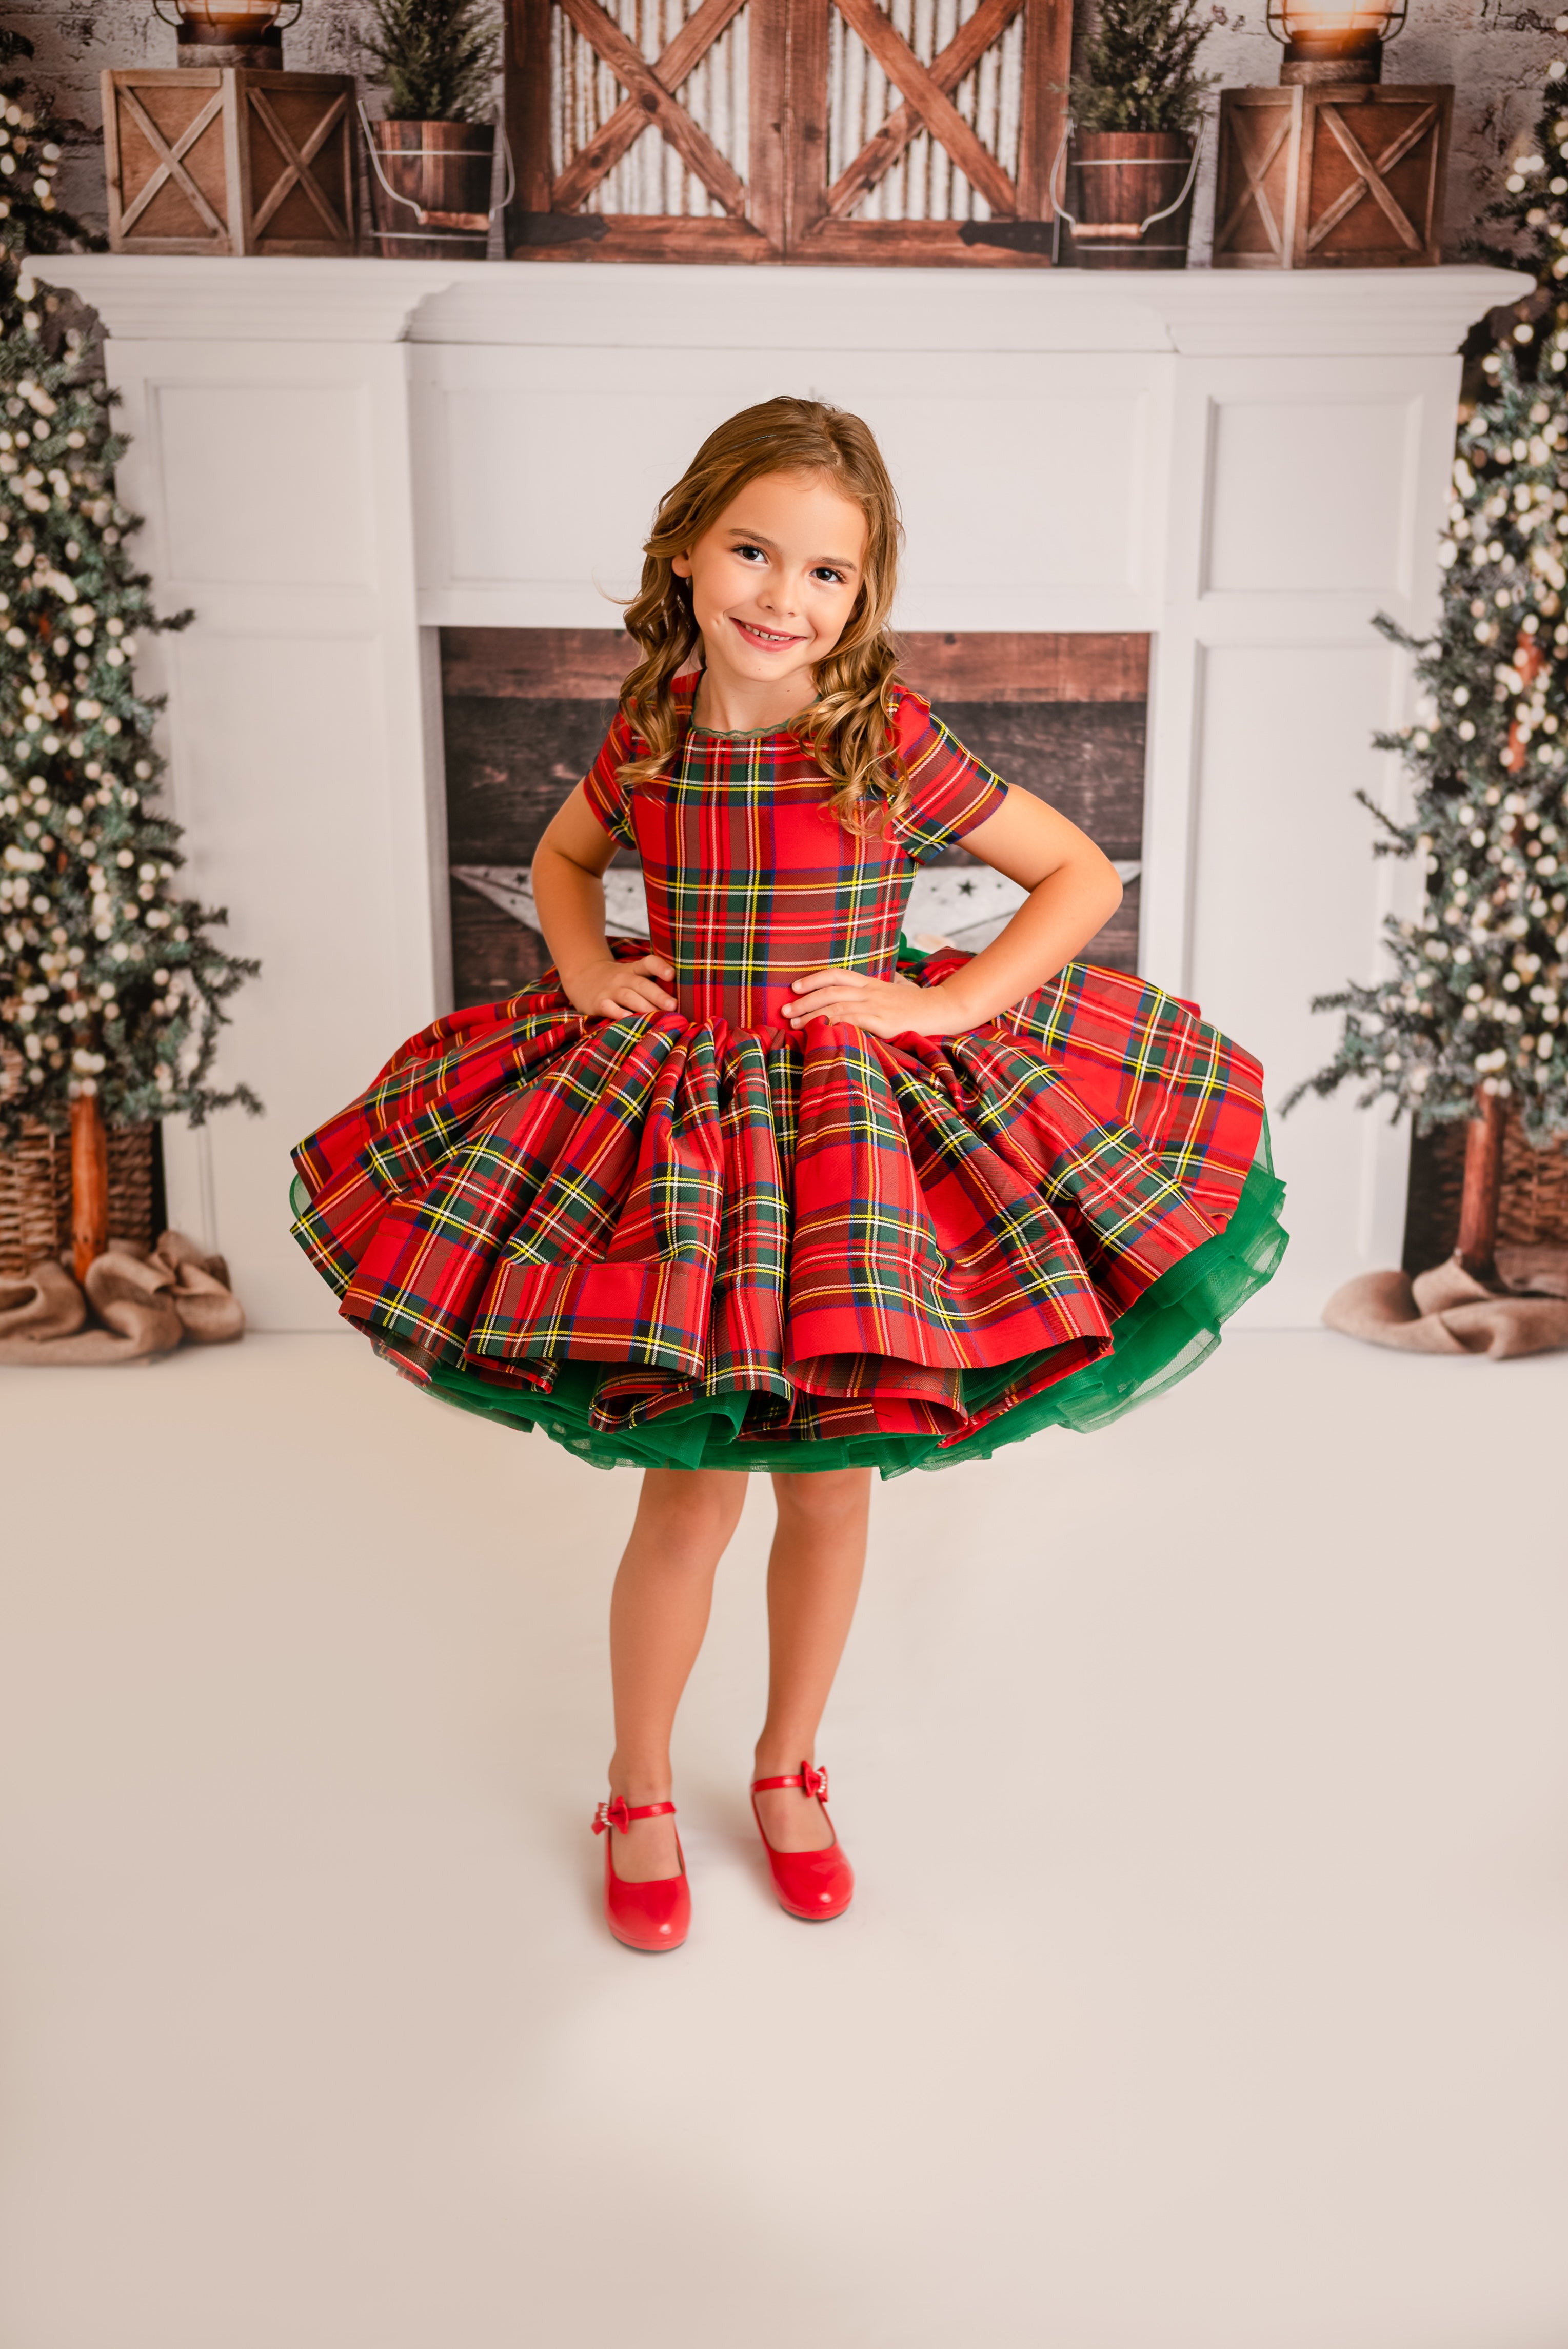 Couture gown rental: "Darling Plaid" Red Vintage Dress Cap Sleeve ( 5 Year - Petite 6 Year)